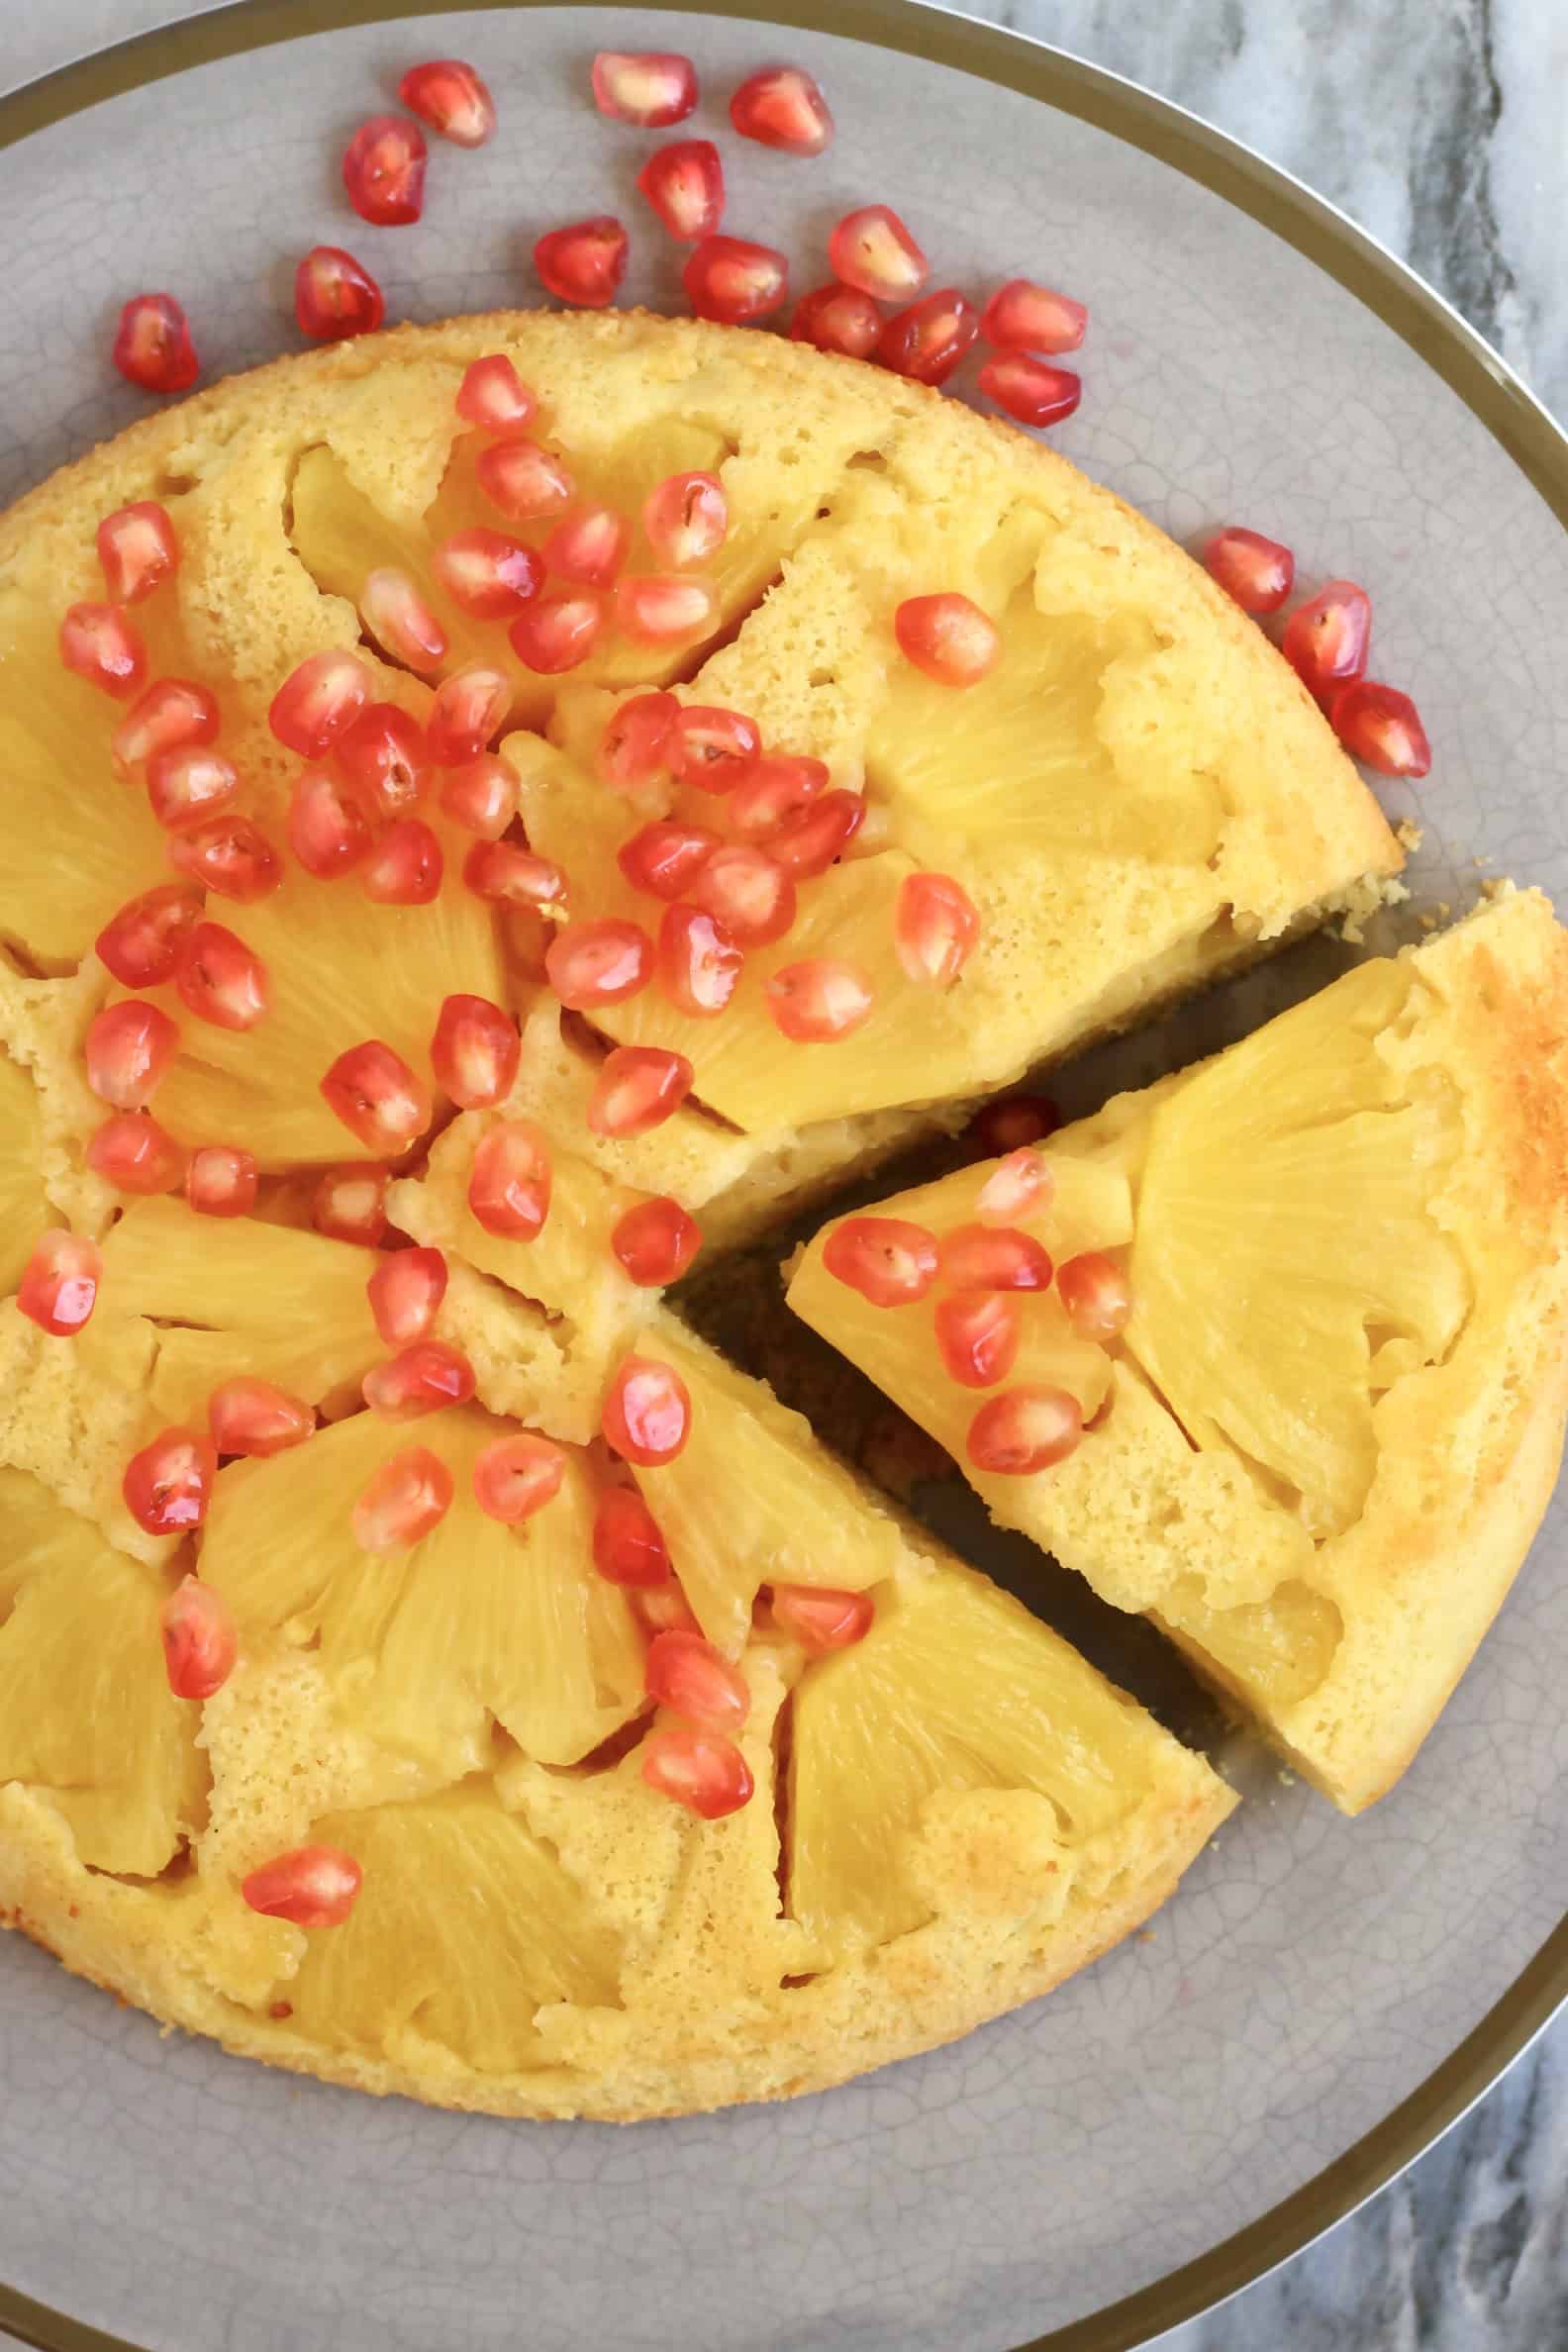 Gluten-free vegan pineapple upside down cake on a plate with a slice cut out of it